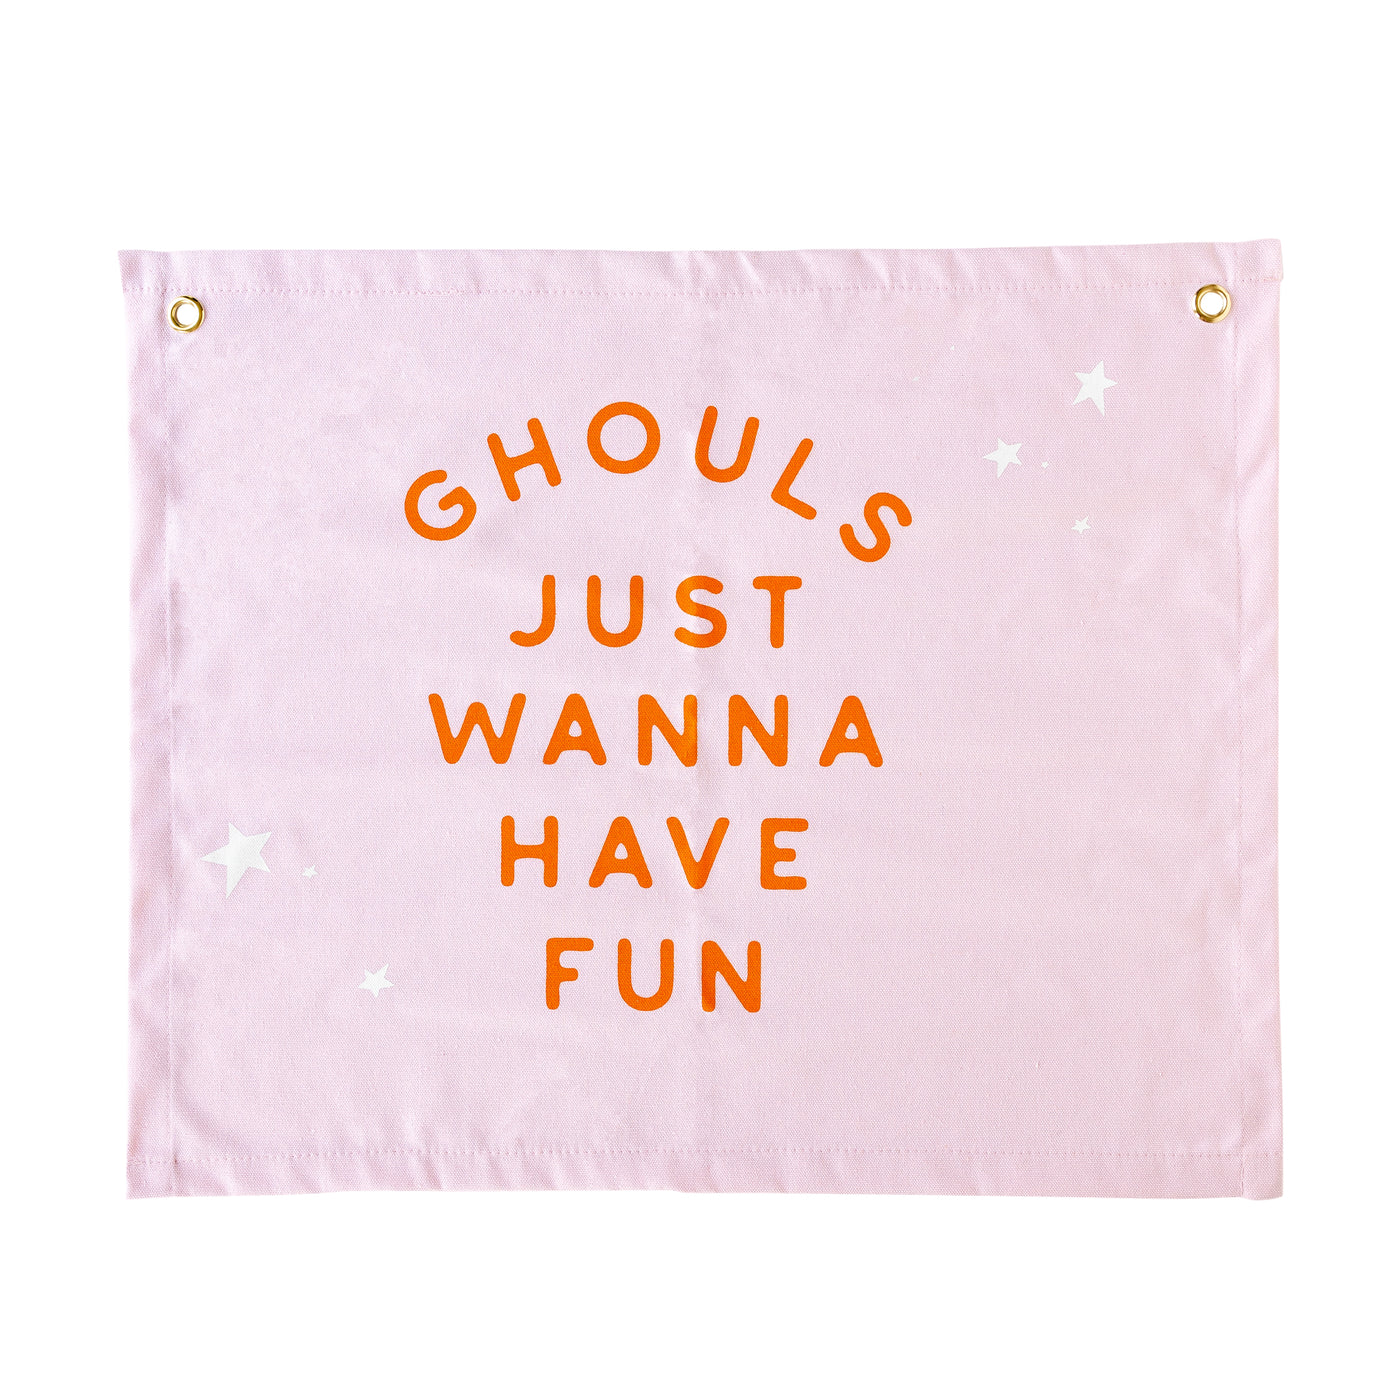 GGH1021 -  Ghoul Gang "Ghouls Just Wanna Have Fun" Canvas Banner